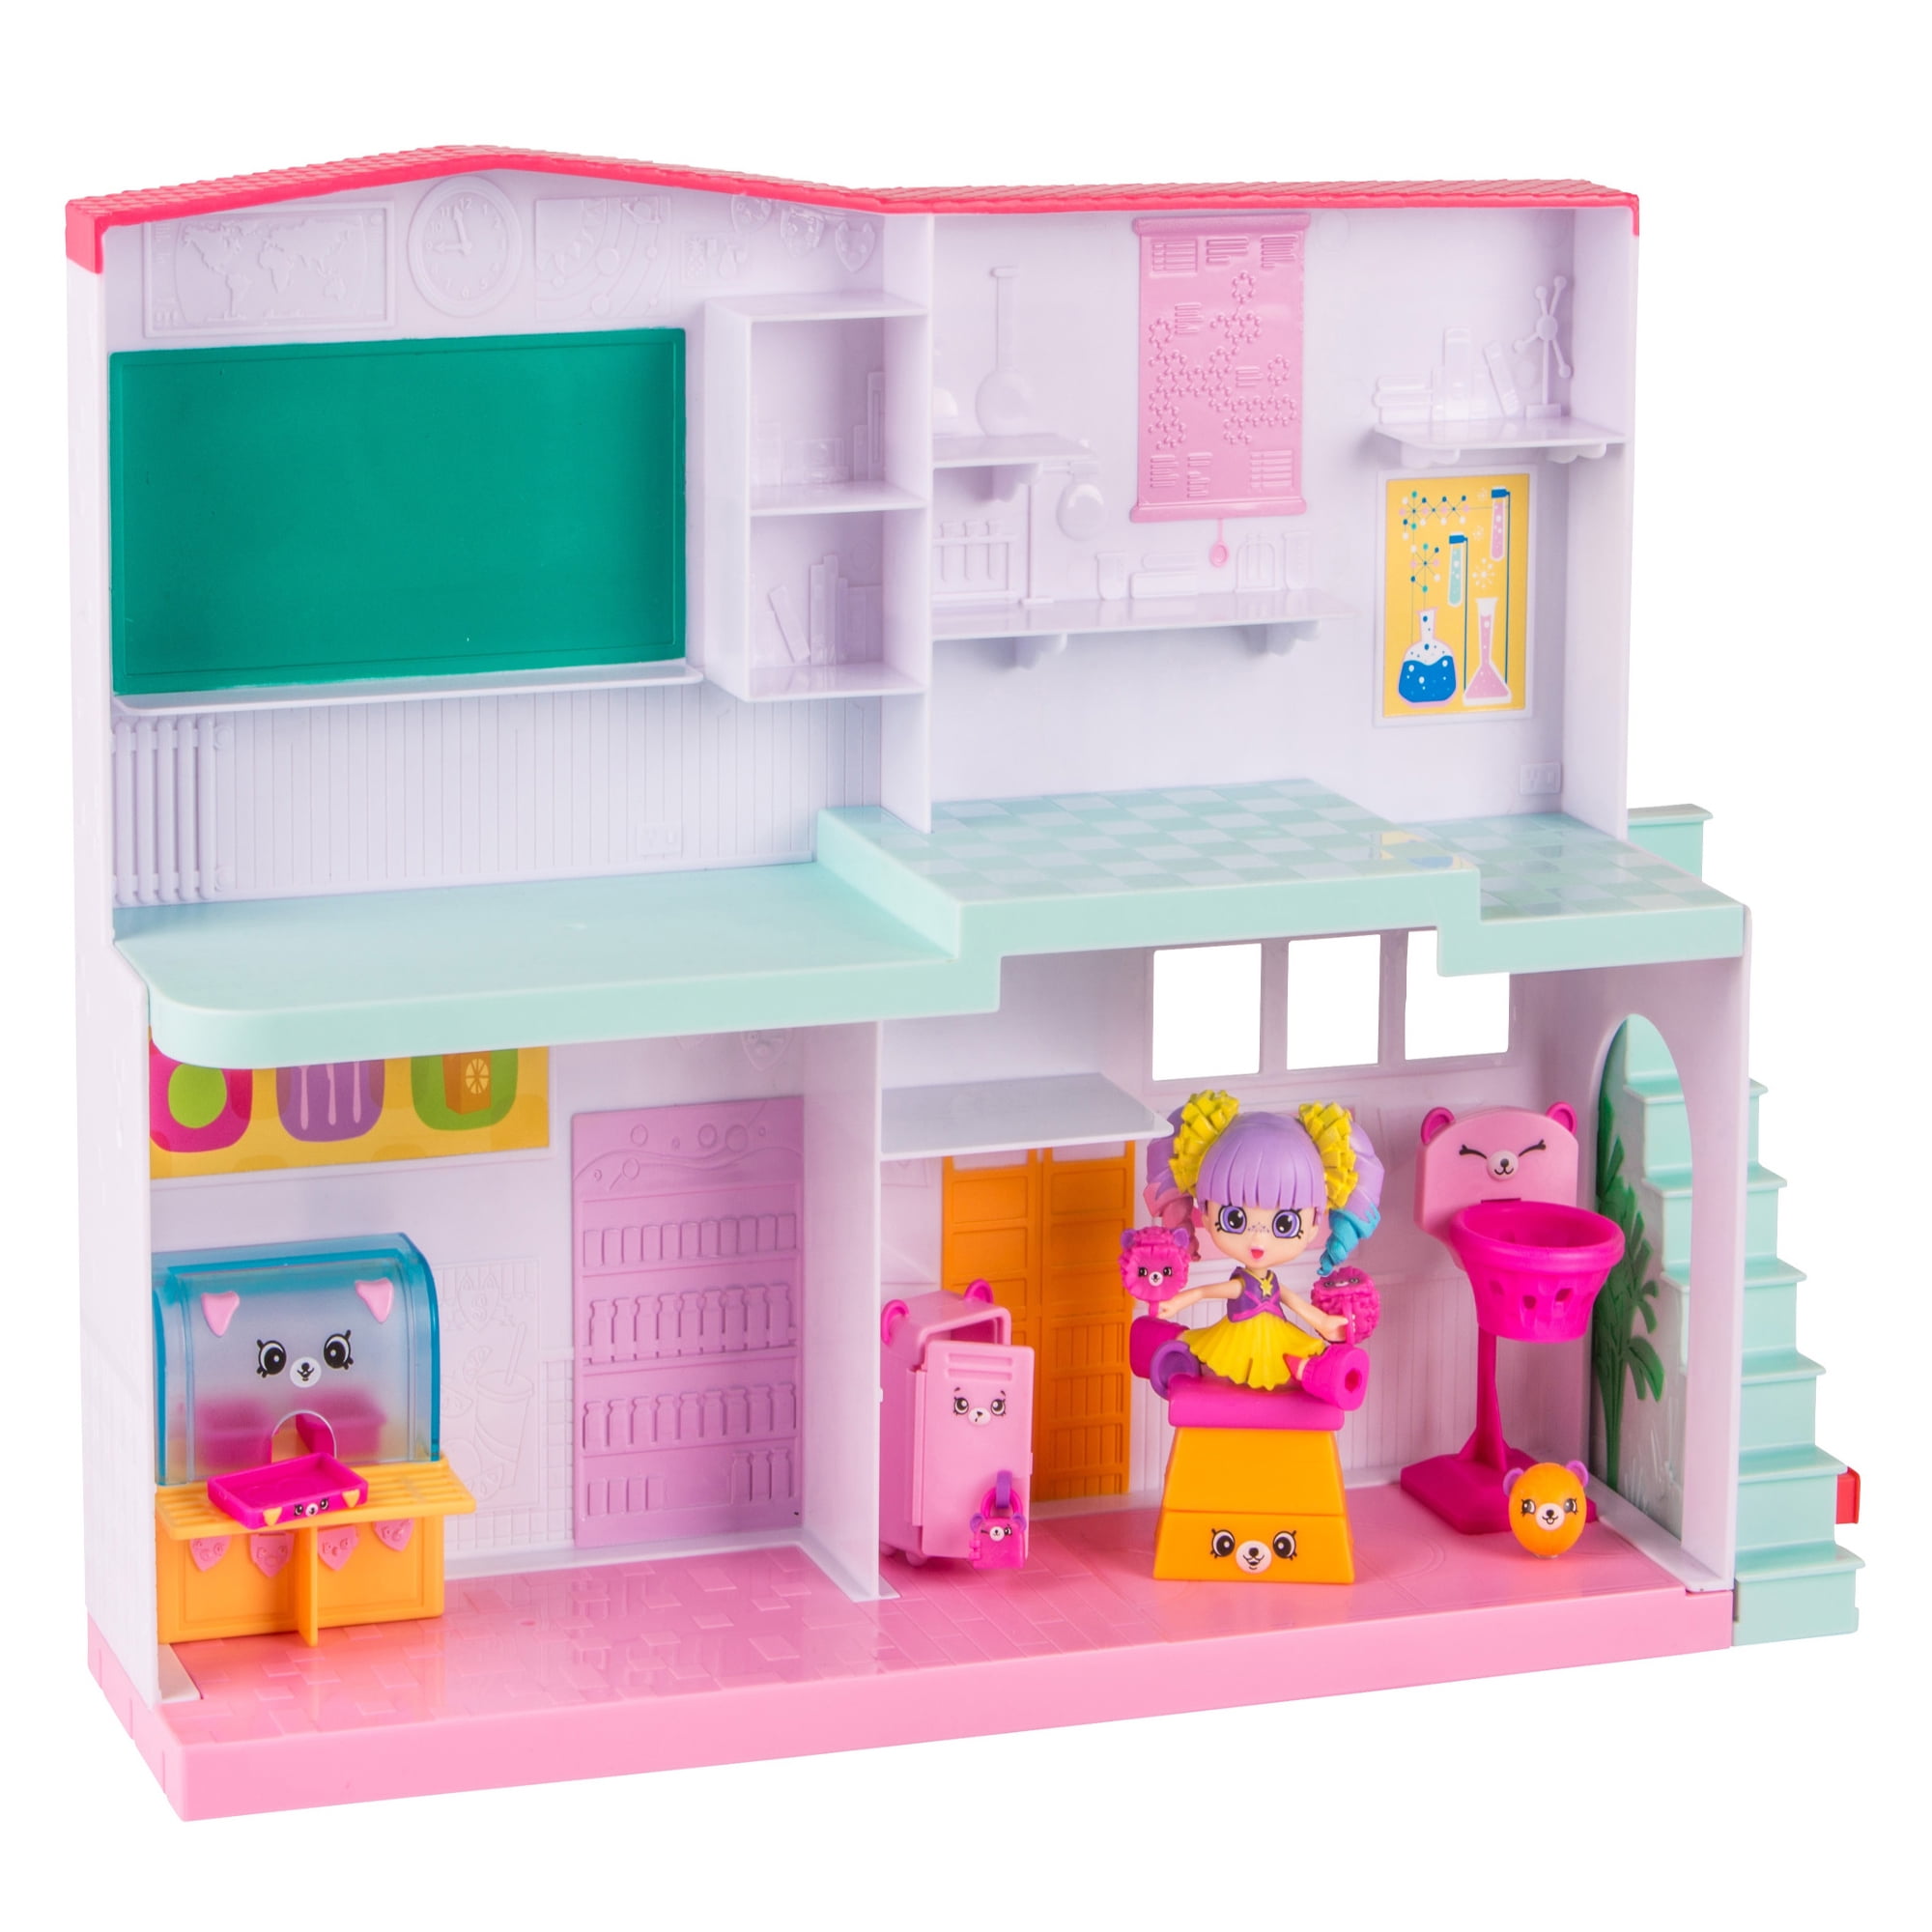 Shopkins House Play Set - Sparkle Hill High School And Accessories